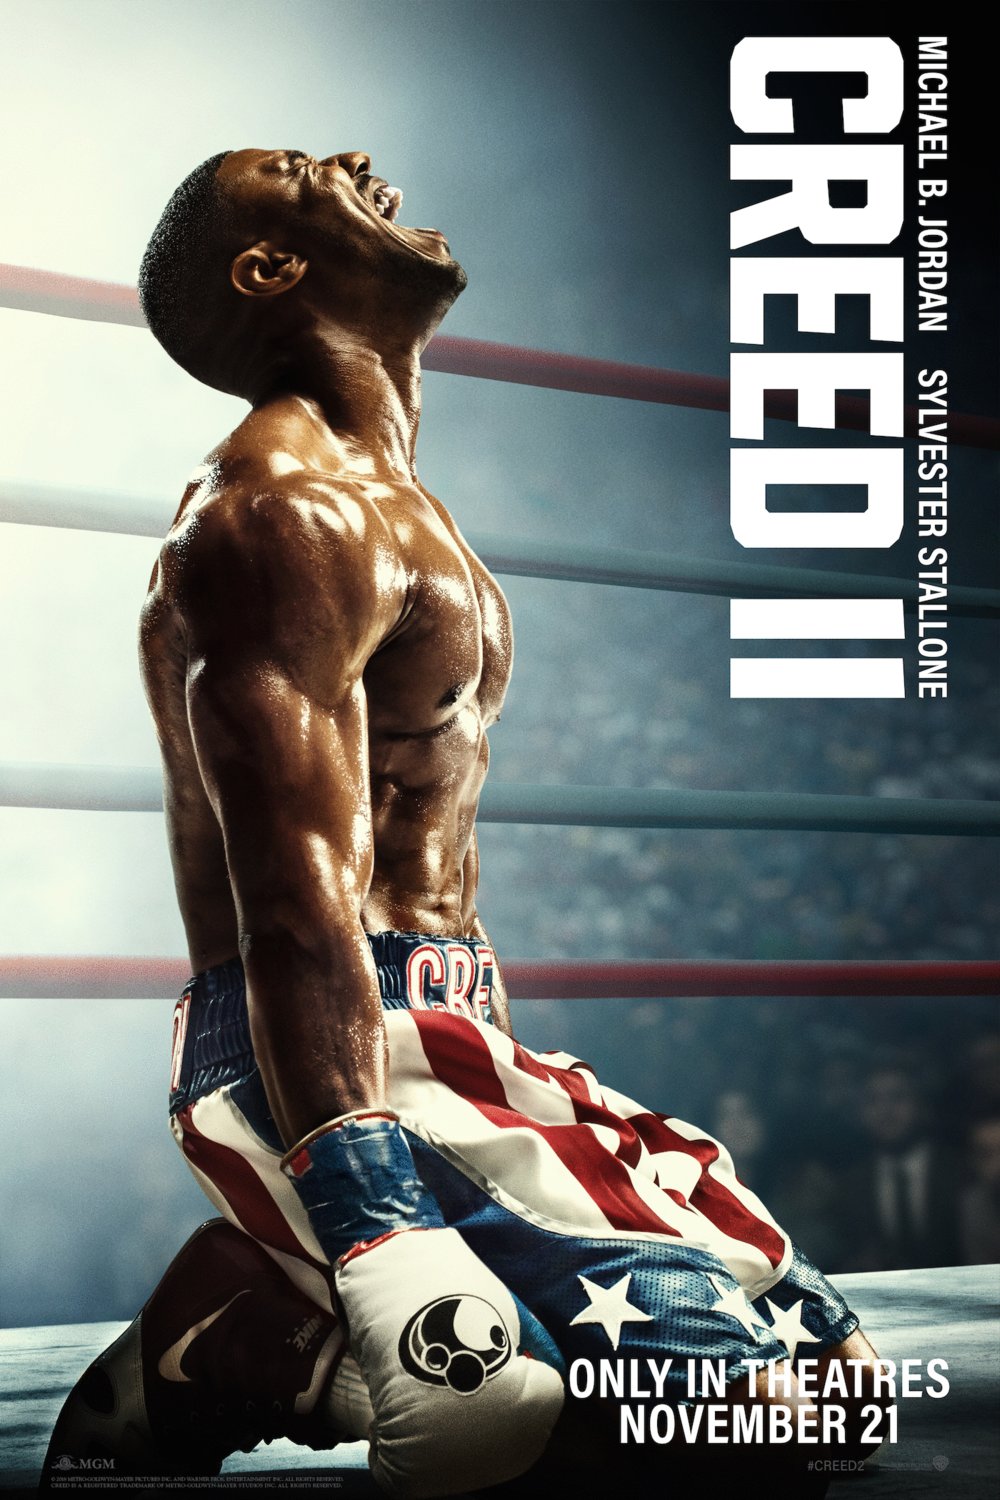 Poster of the movie Creed II v.f.